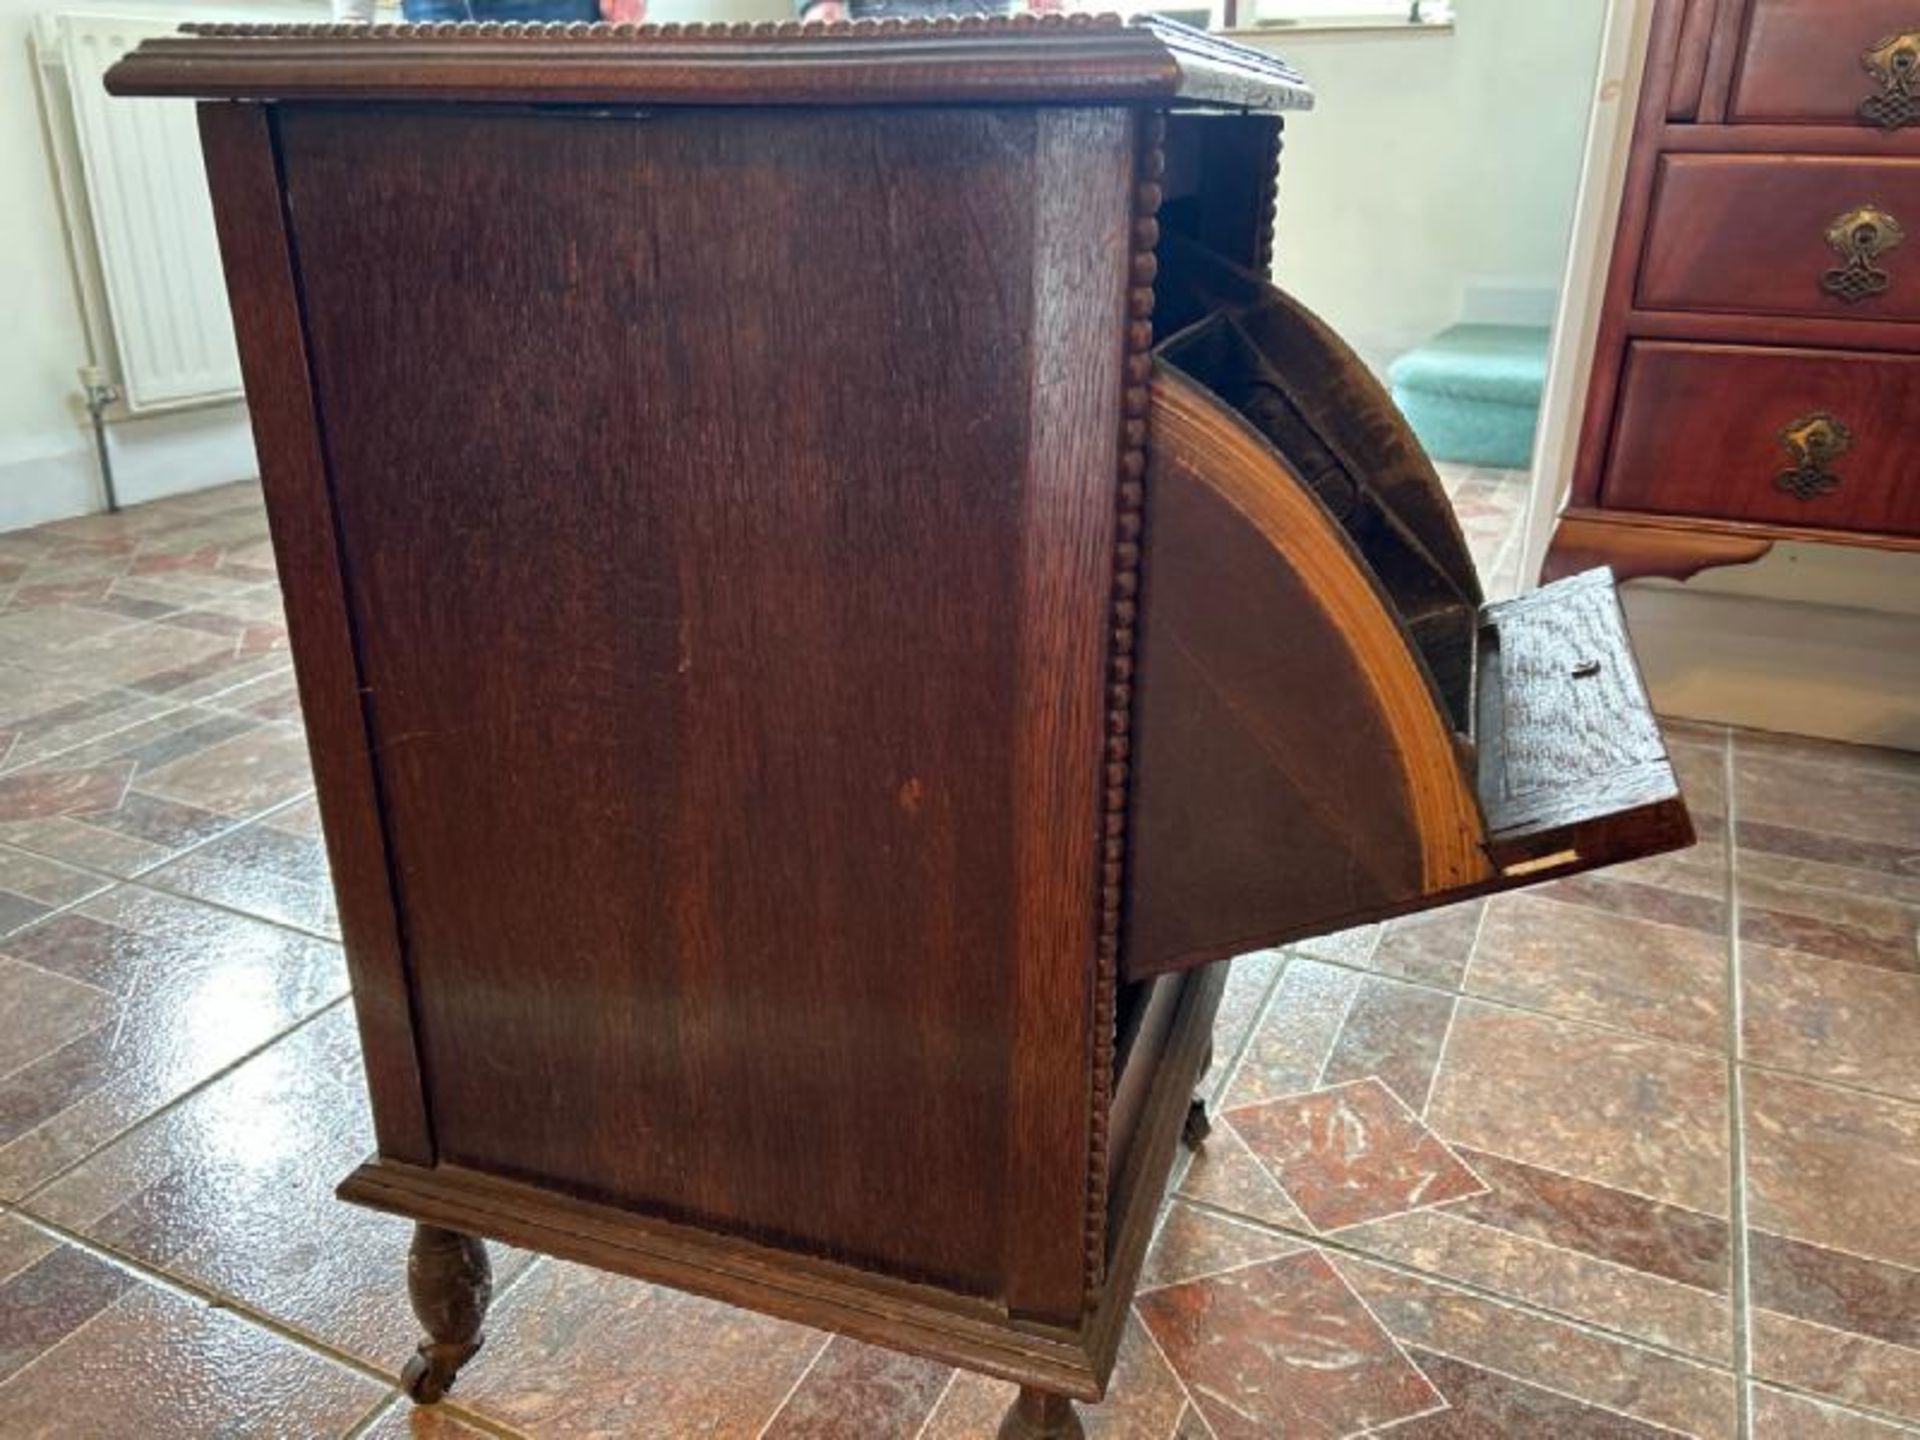 Antique coal scuttle in oak cabinet on casters, 40x65x38cm (collection from private residence in - Image 2 of 4